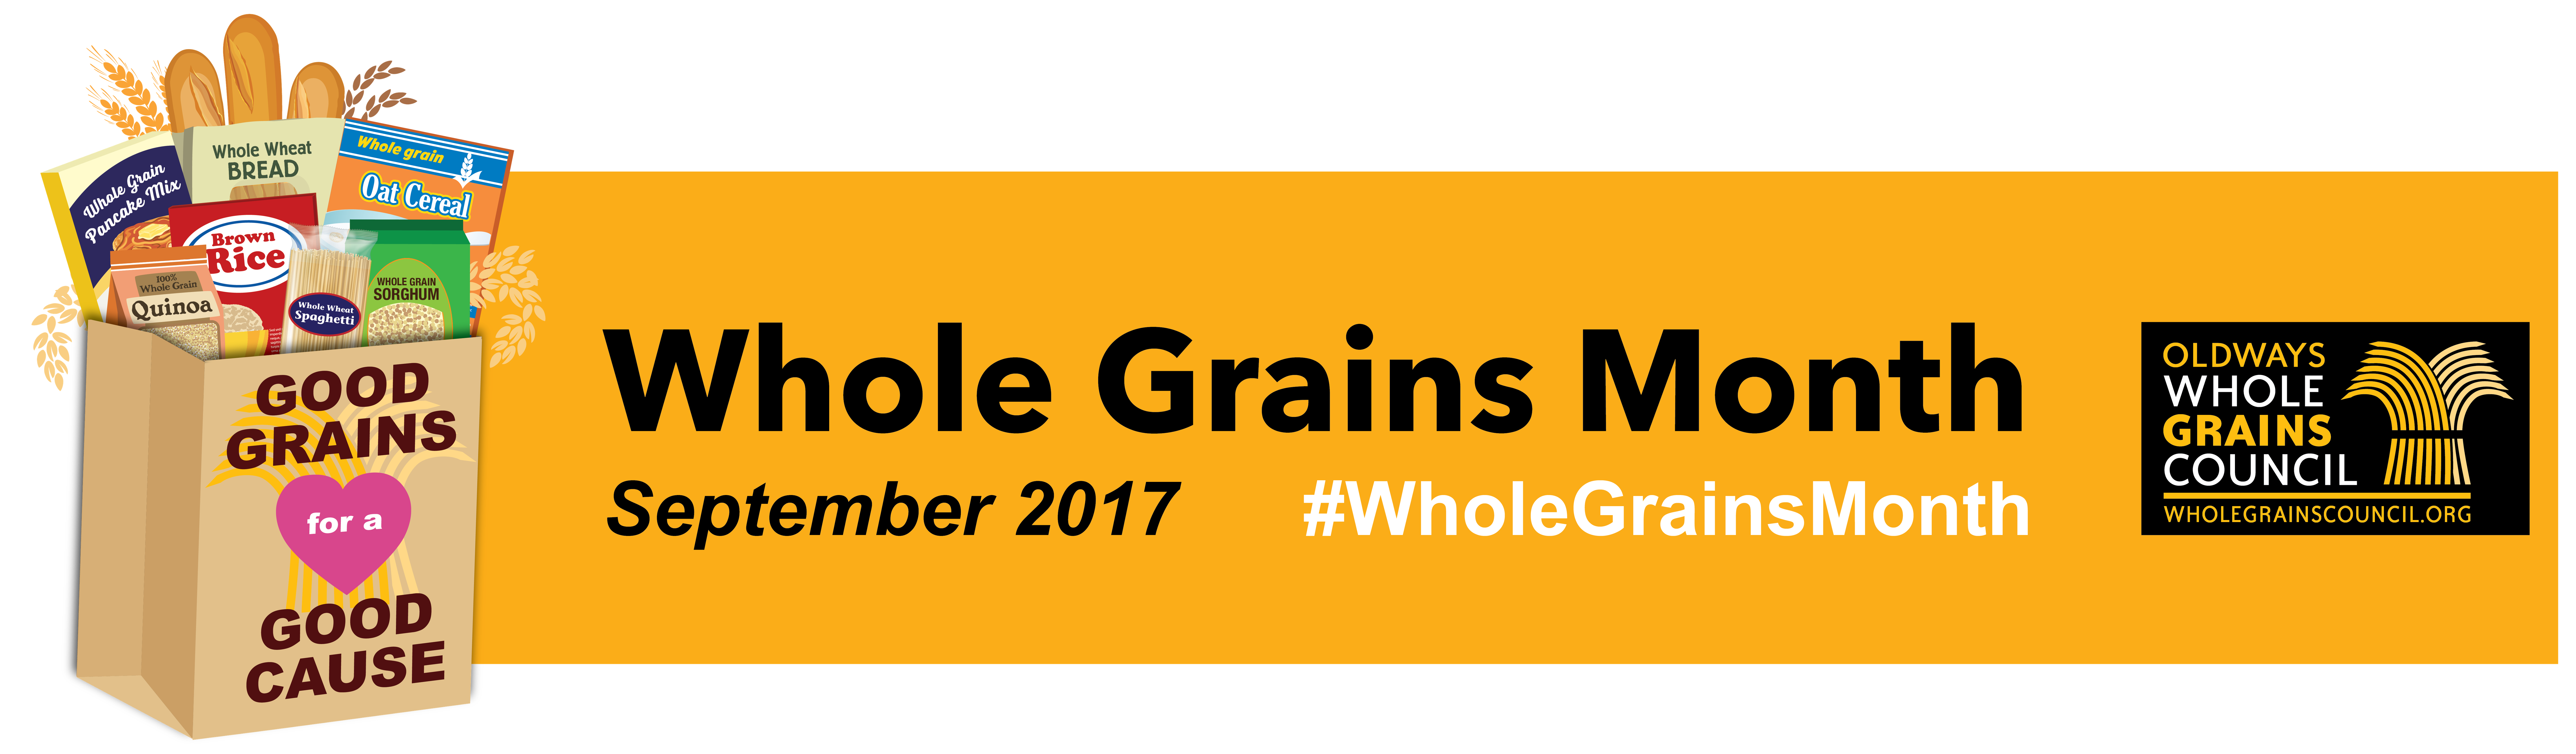 Good Grains for a Good Cause